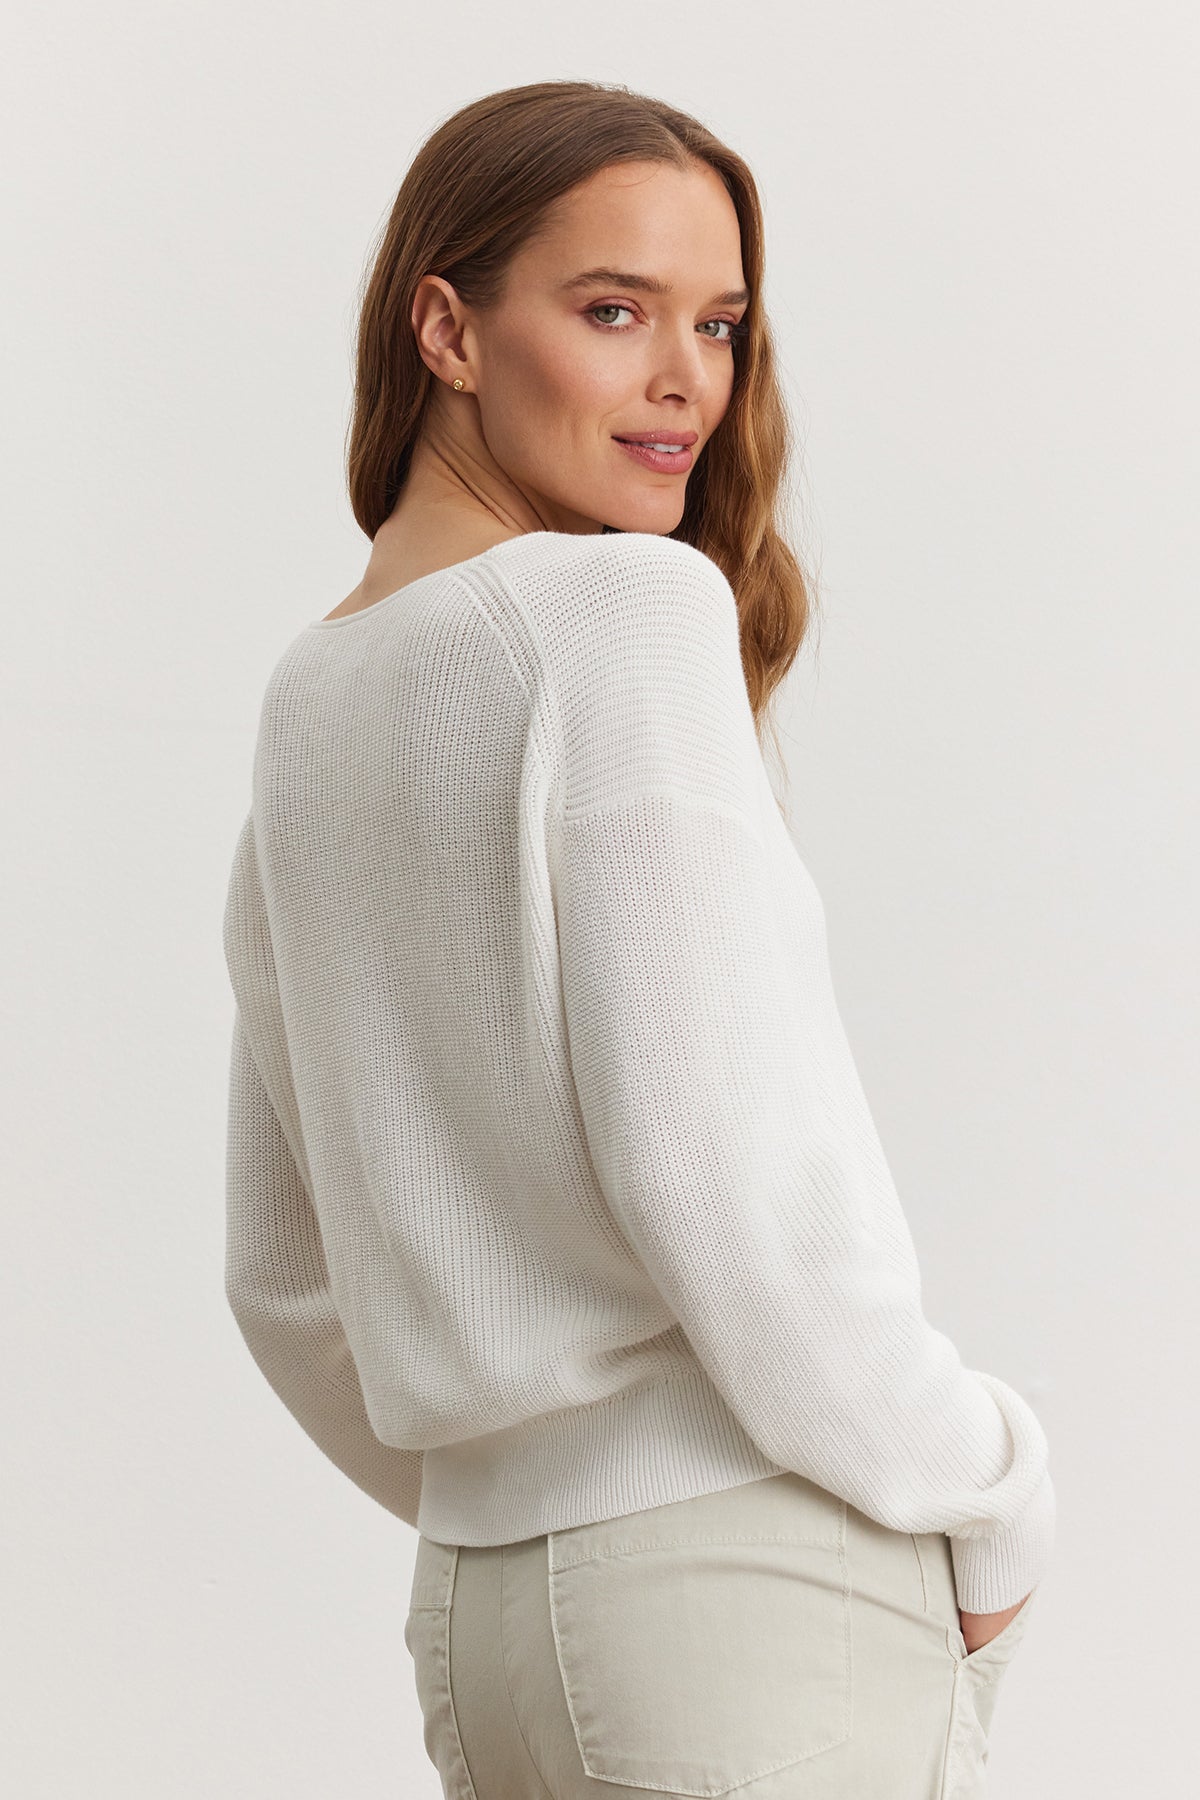 A woman in a white ribbed Velvet by Graham & Spencer TAVA cardigan and light beige pants, standing with her back slightly turned, looking over her shoulder with a soft smile.-36909564166337